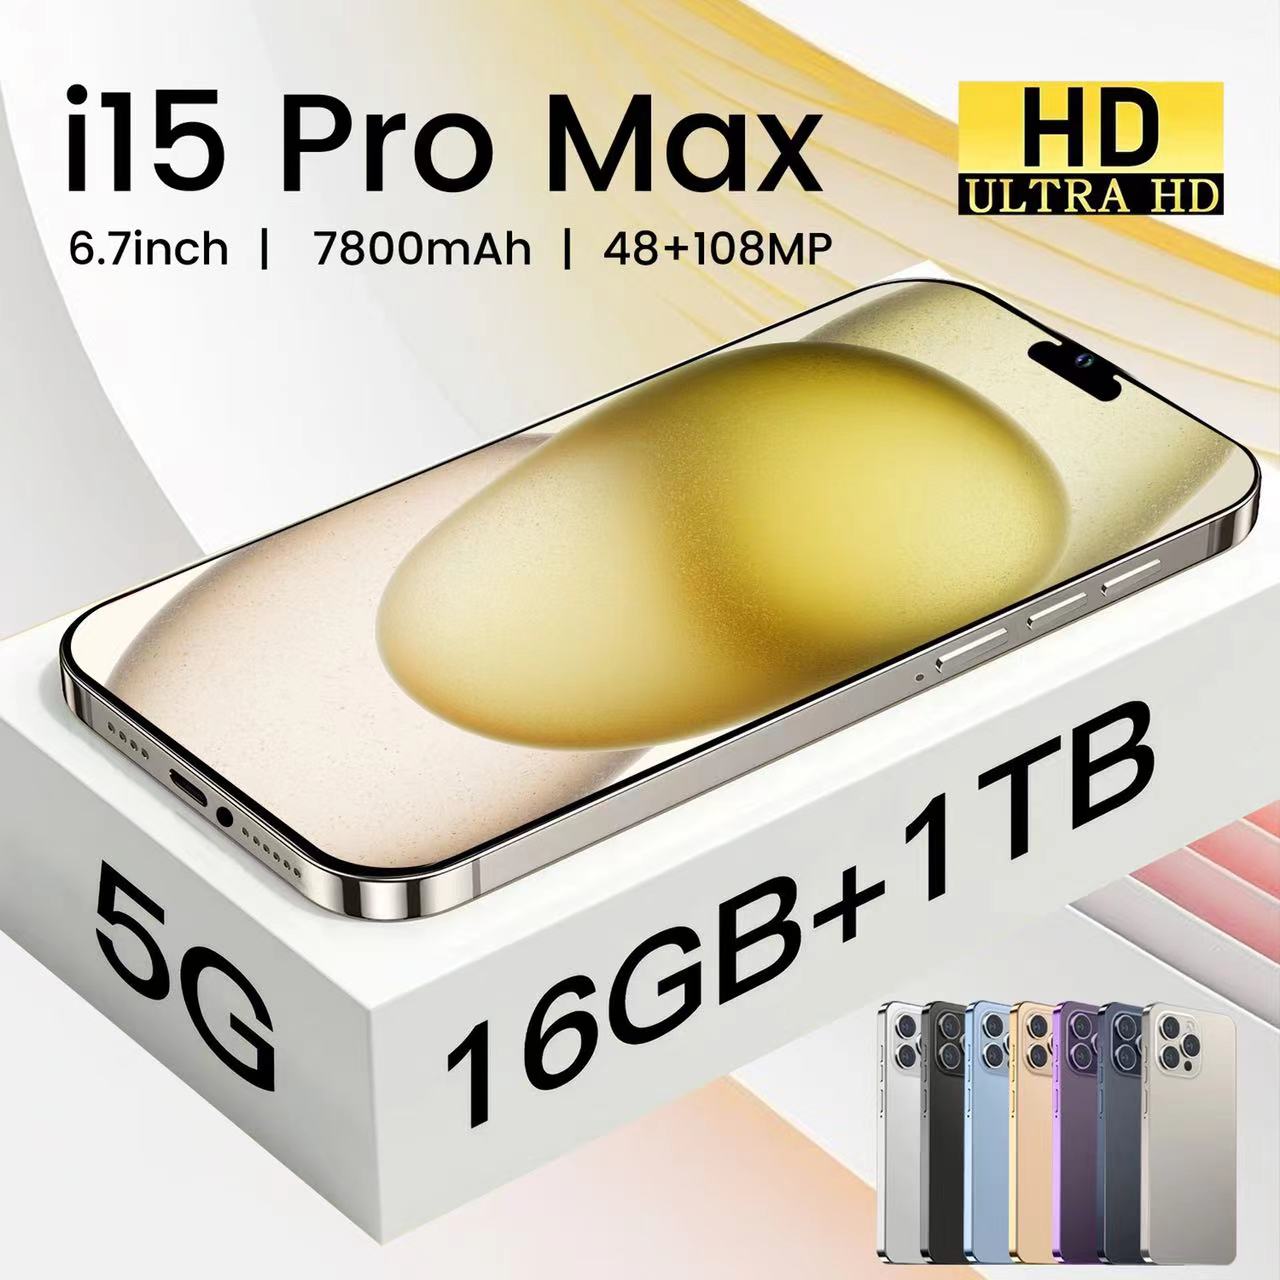 I15 Pro Max 5G Téléphone Smartphone 6,7 pouces Smartphone 4G LTE Smartphones 16 Go RAM 1 To Caméra 48MP 108MP Face ID GPS OCTA Core Android Mobile Phone Mobile